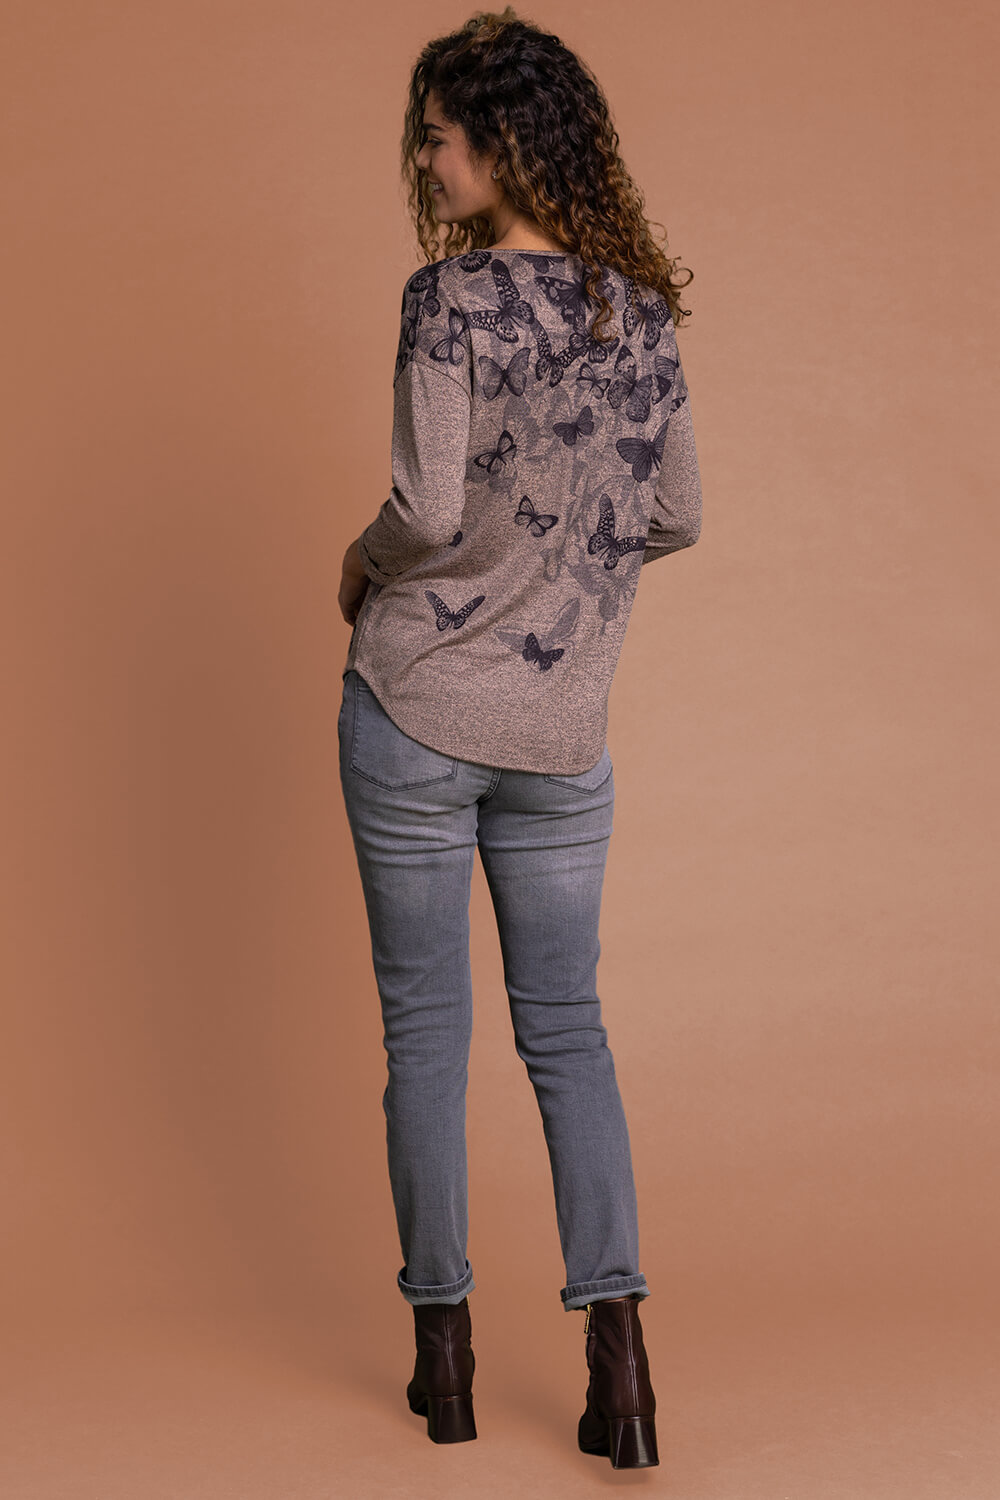 Taupe Butterfly Print 3/4 Sleeve Jersey Top, Image 2 of 4